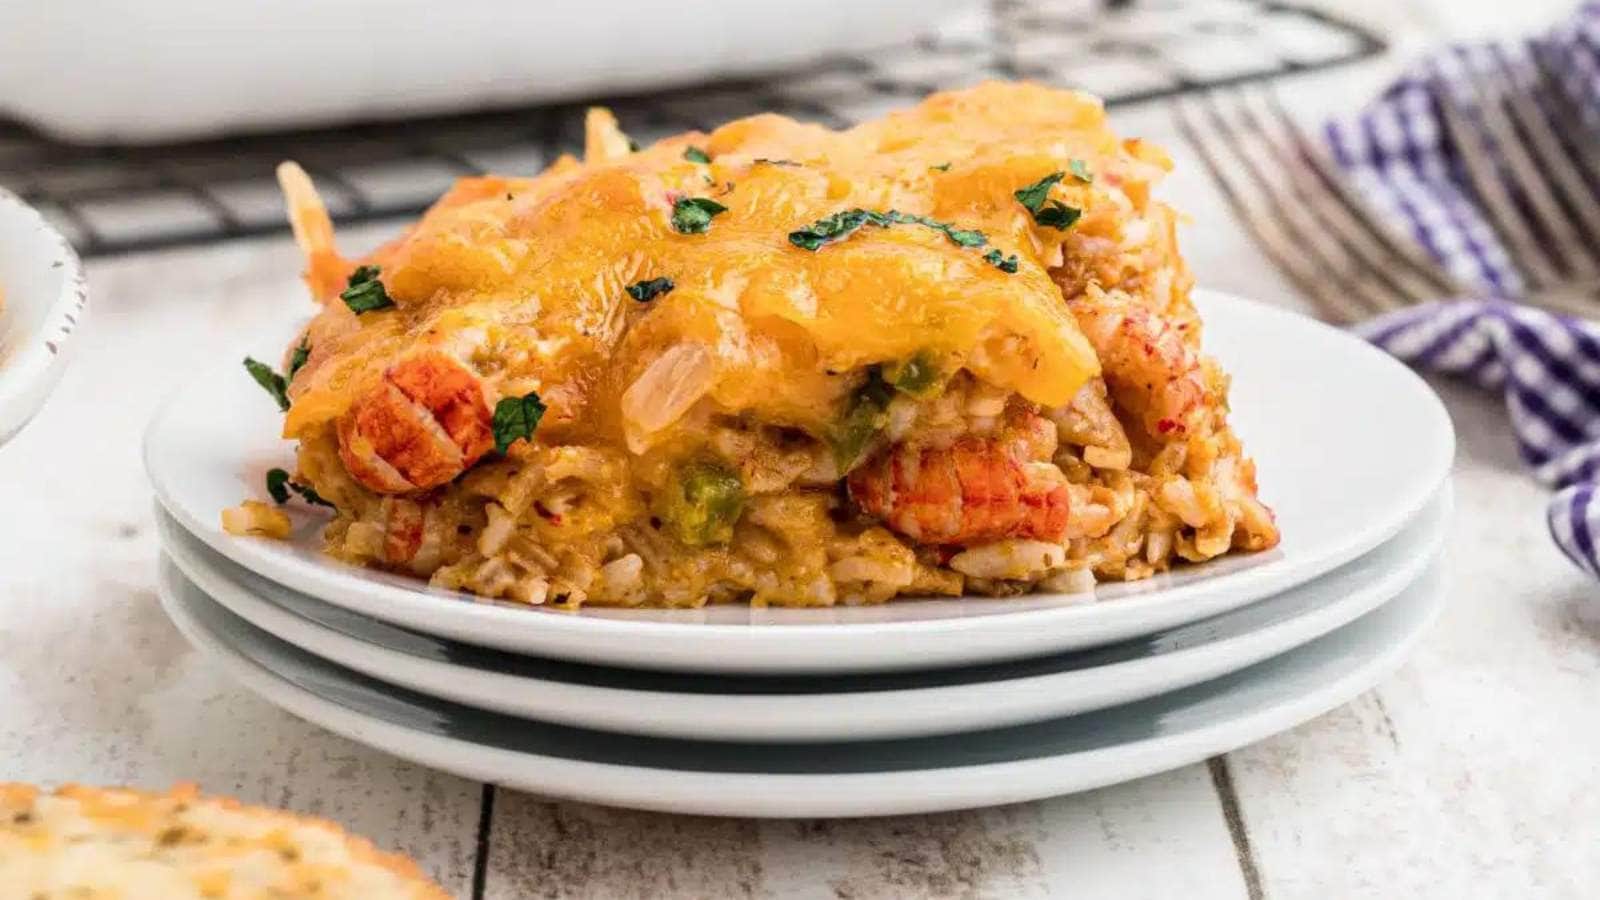 <p>This crawfish casserole recipe is one of my favorites to whip up when I have some leftovers from a crawfish boil. A tasty crawfish tails, rice, and cheese dish that will knock your socks off.</p><p><strong>Get the Recipe: <a href="https://thecaglediaries.com/crawfish-casserole-recipe/" rel="noreferrer noopener">Crawfish Casserole</a></strong></p>